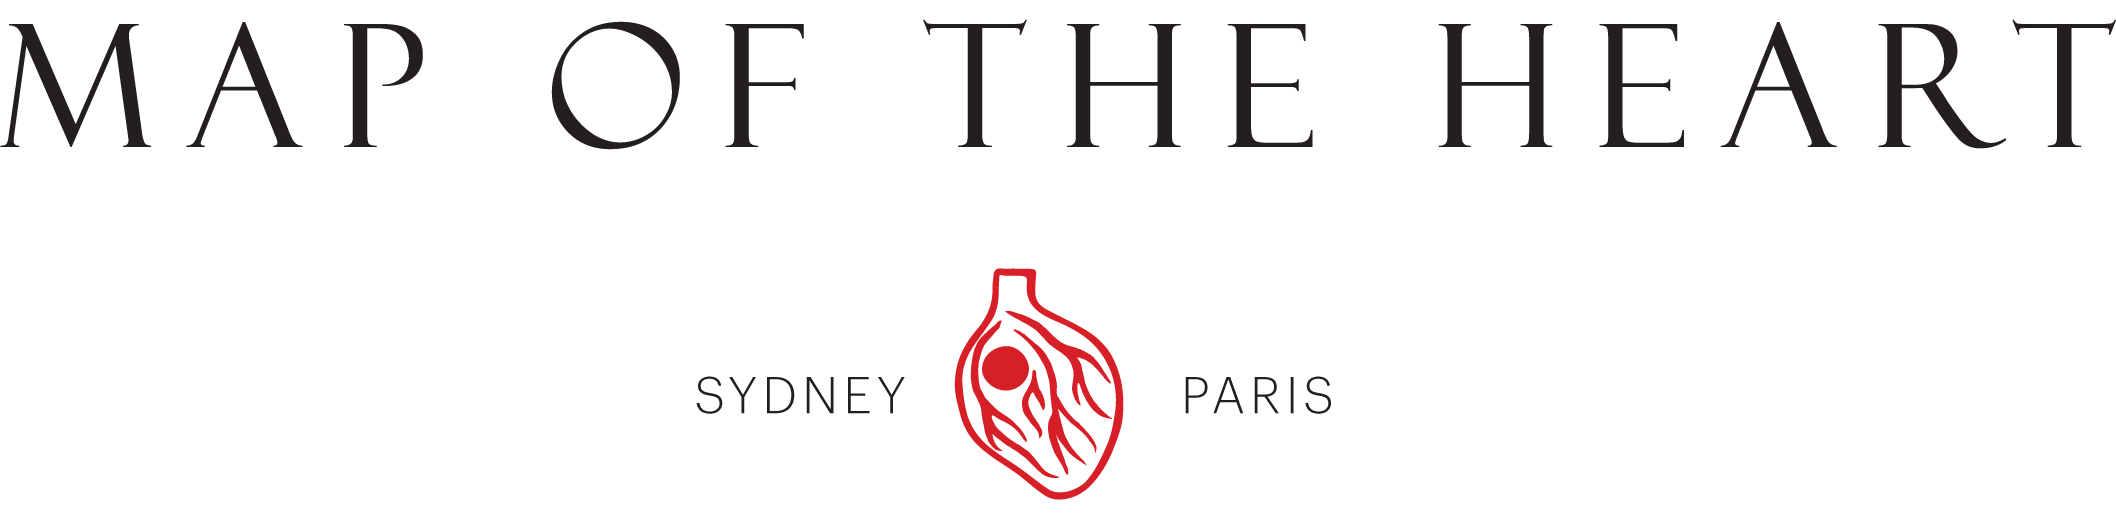 1-Map-of-the-heart-Logo